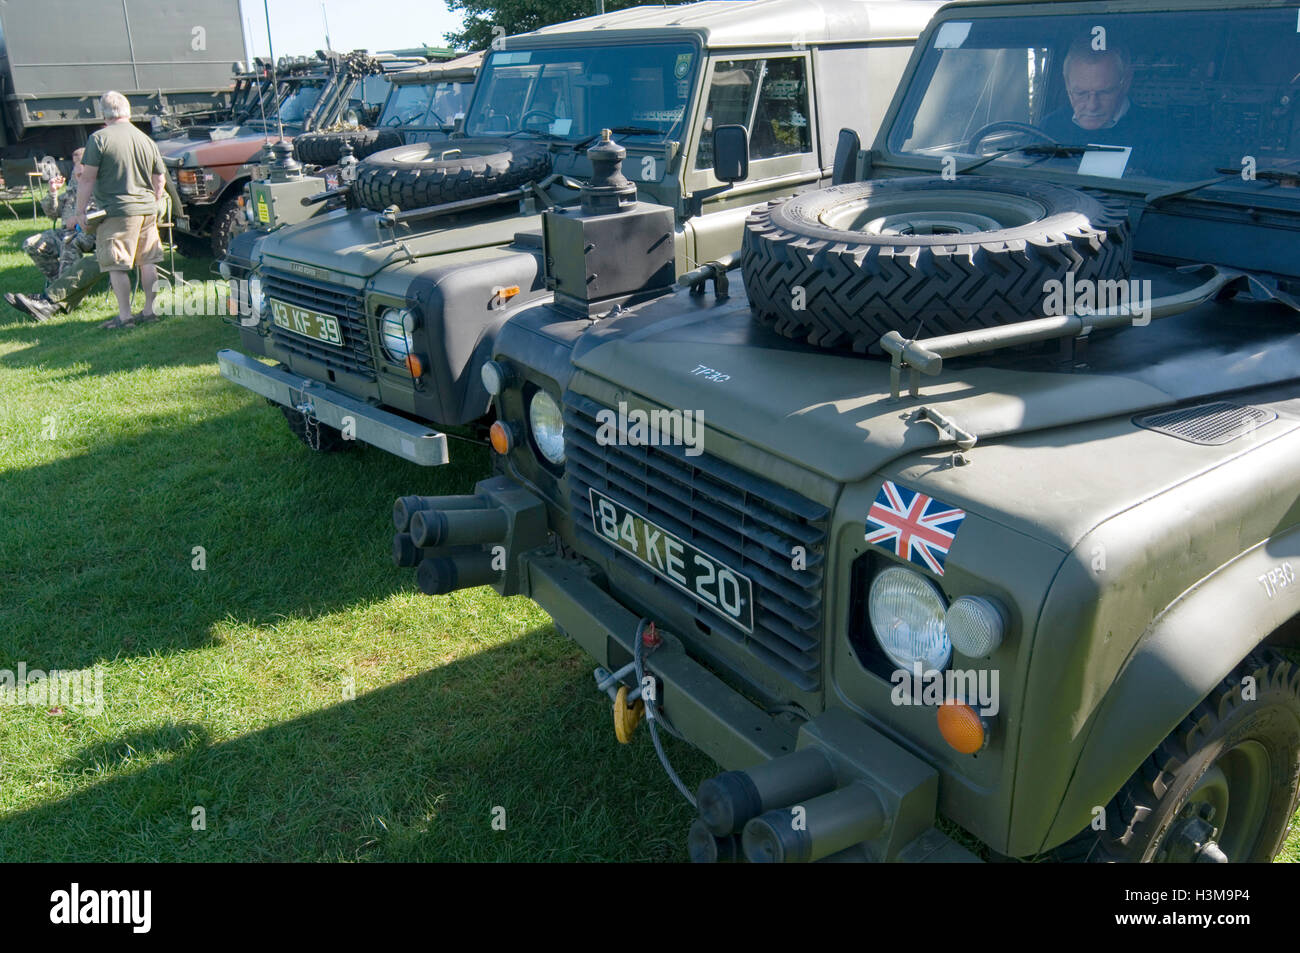 Army landrover land rover rover landrovers Banque D'Images